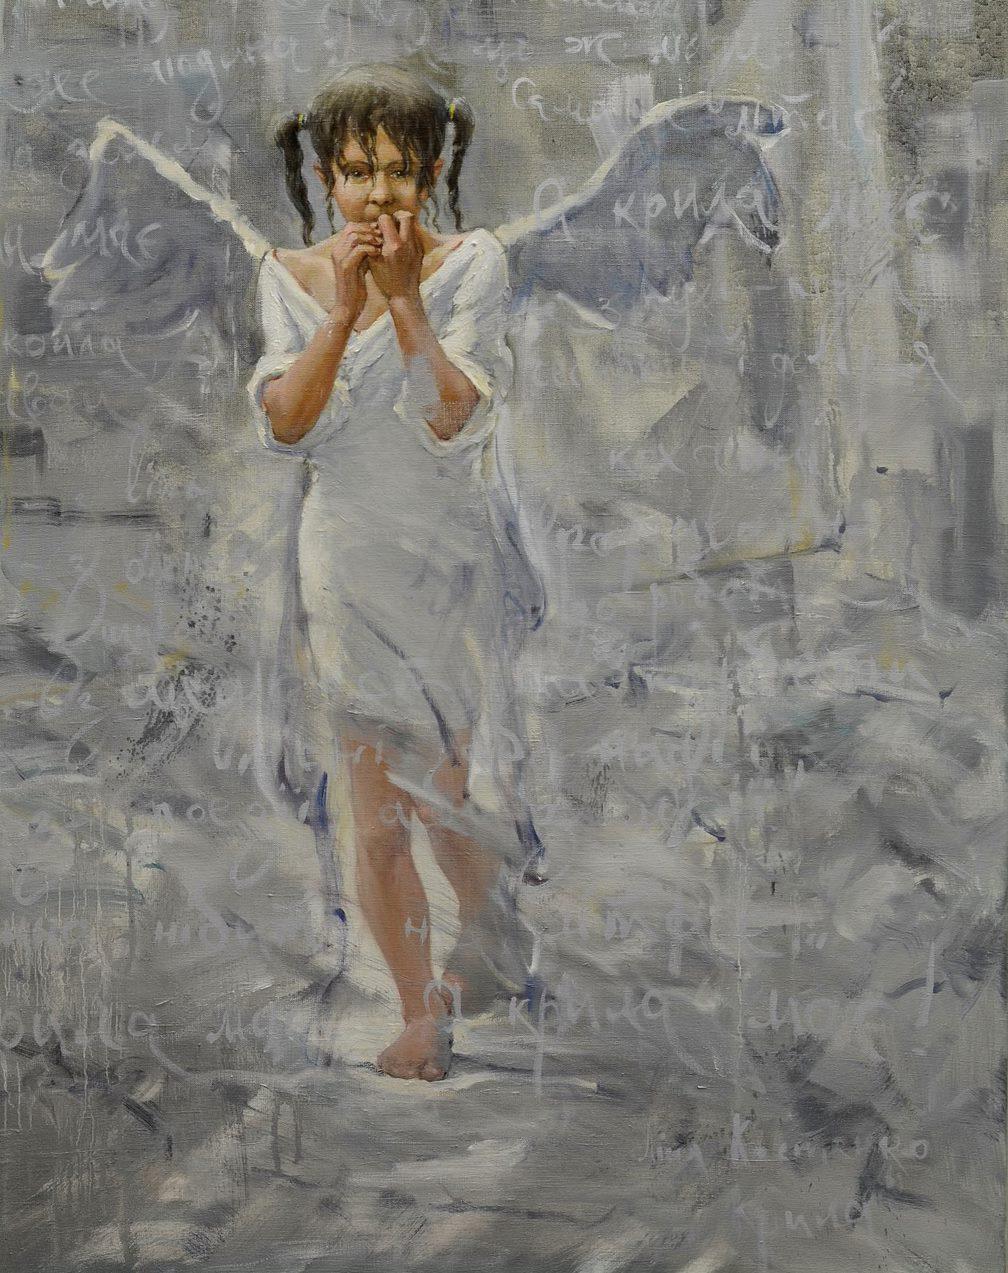 Artist: Oleg Kateryniuk
Work: Original oil painting, handmade artwork, one of a kind 
Medium: Oil on Canvas 
Year: 2023
Style: Contemporary Art
Title: Not Lost Wings
Size: 49.5